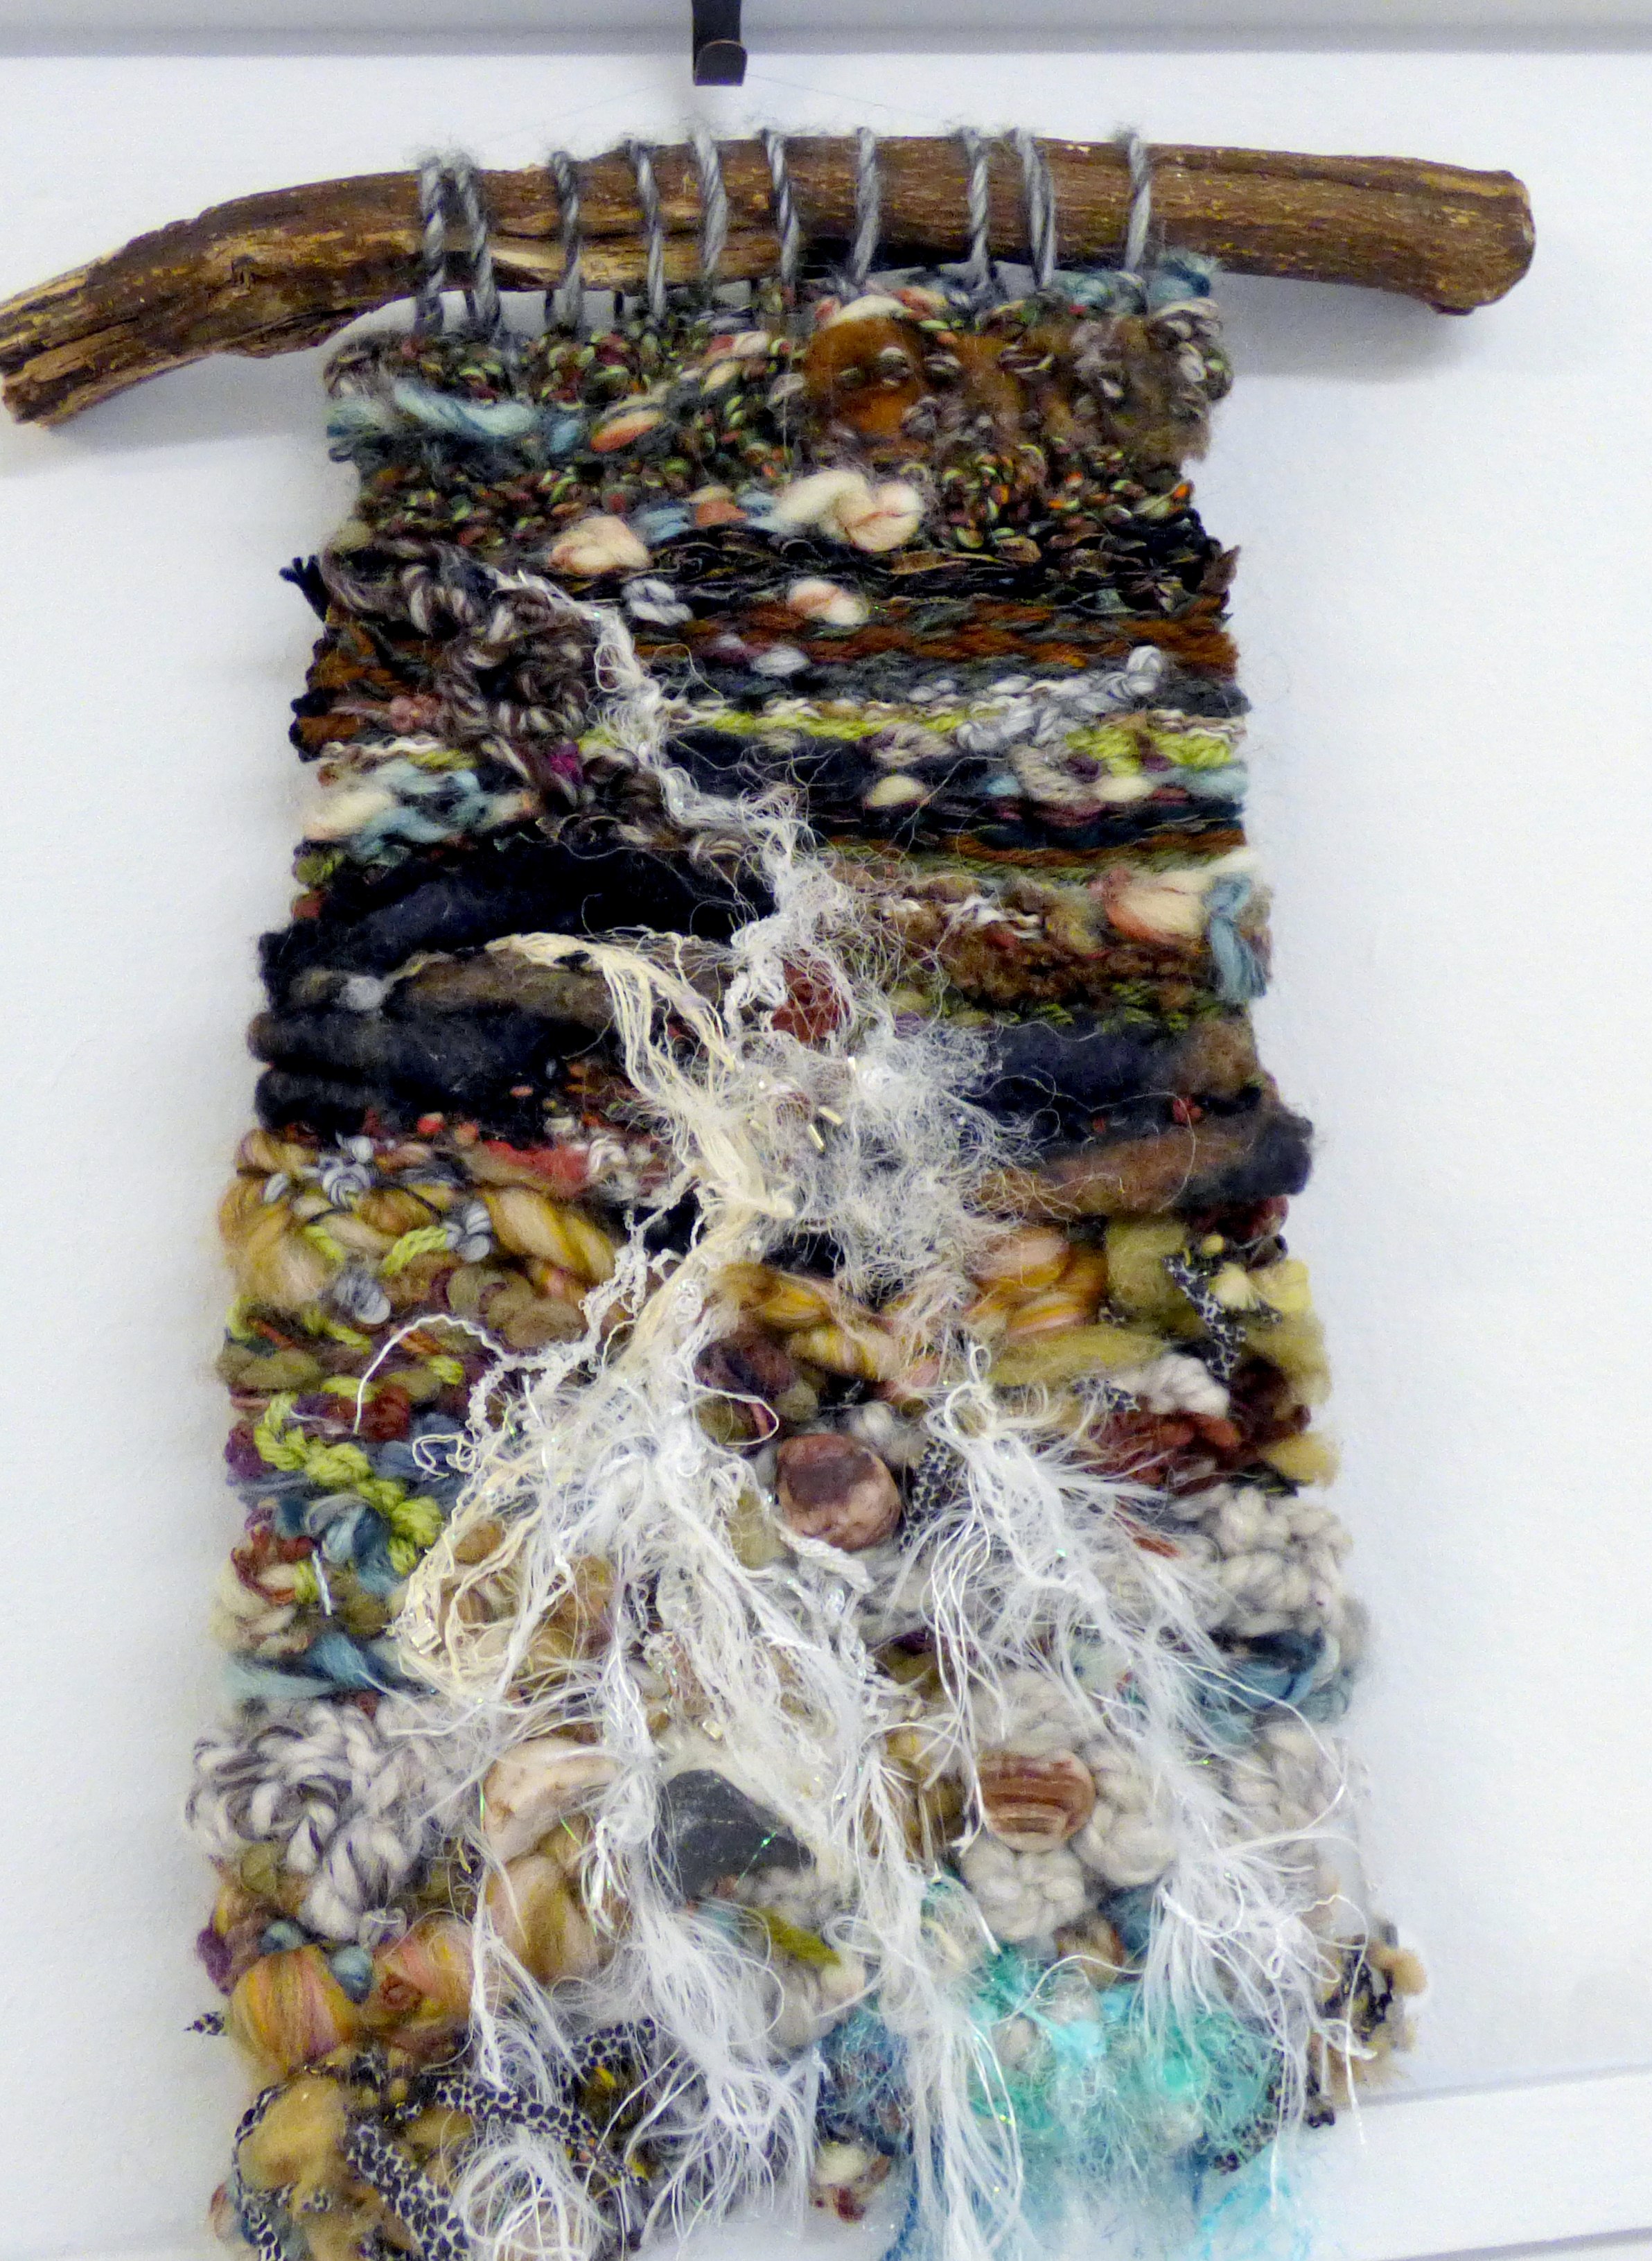 THE SOURCE IN THE HILLS by Janet Vance, woven hanging with pebbles and yarns, ConText group 2018